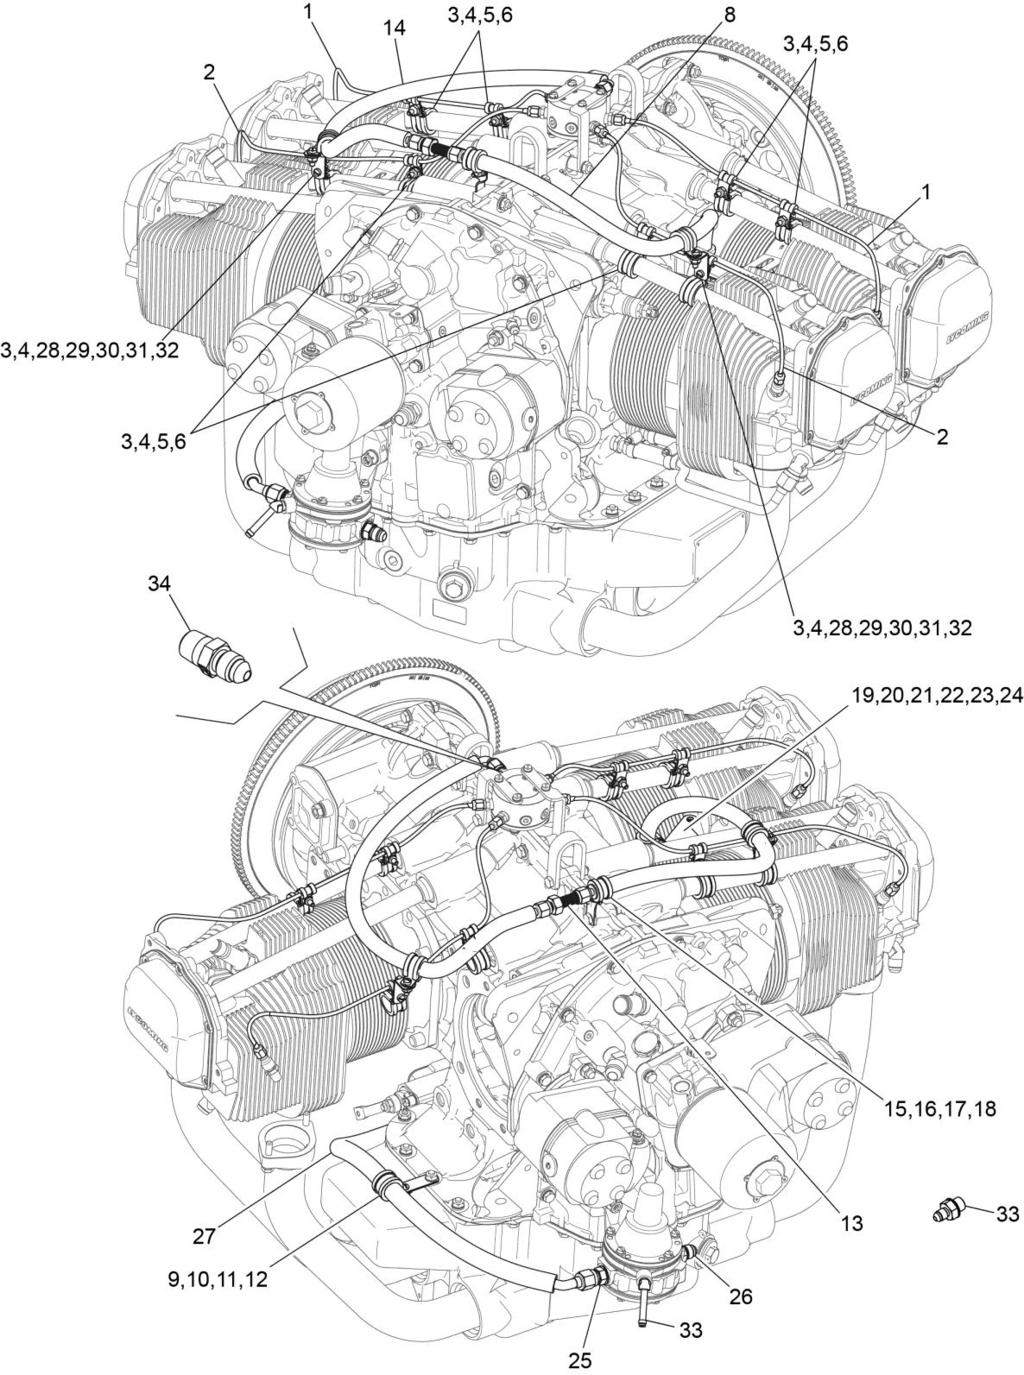 Figure 25B Fuel Lines, Fuel Hoses, and Attaching Parts (1B and 3B) 73-10 Effectivity: IO-390- Series